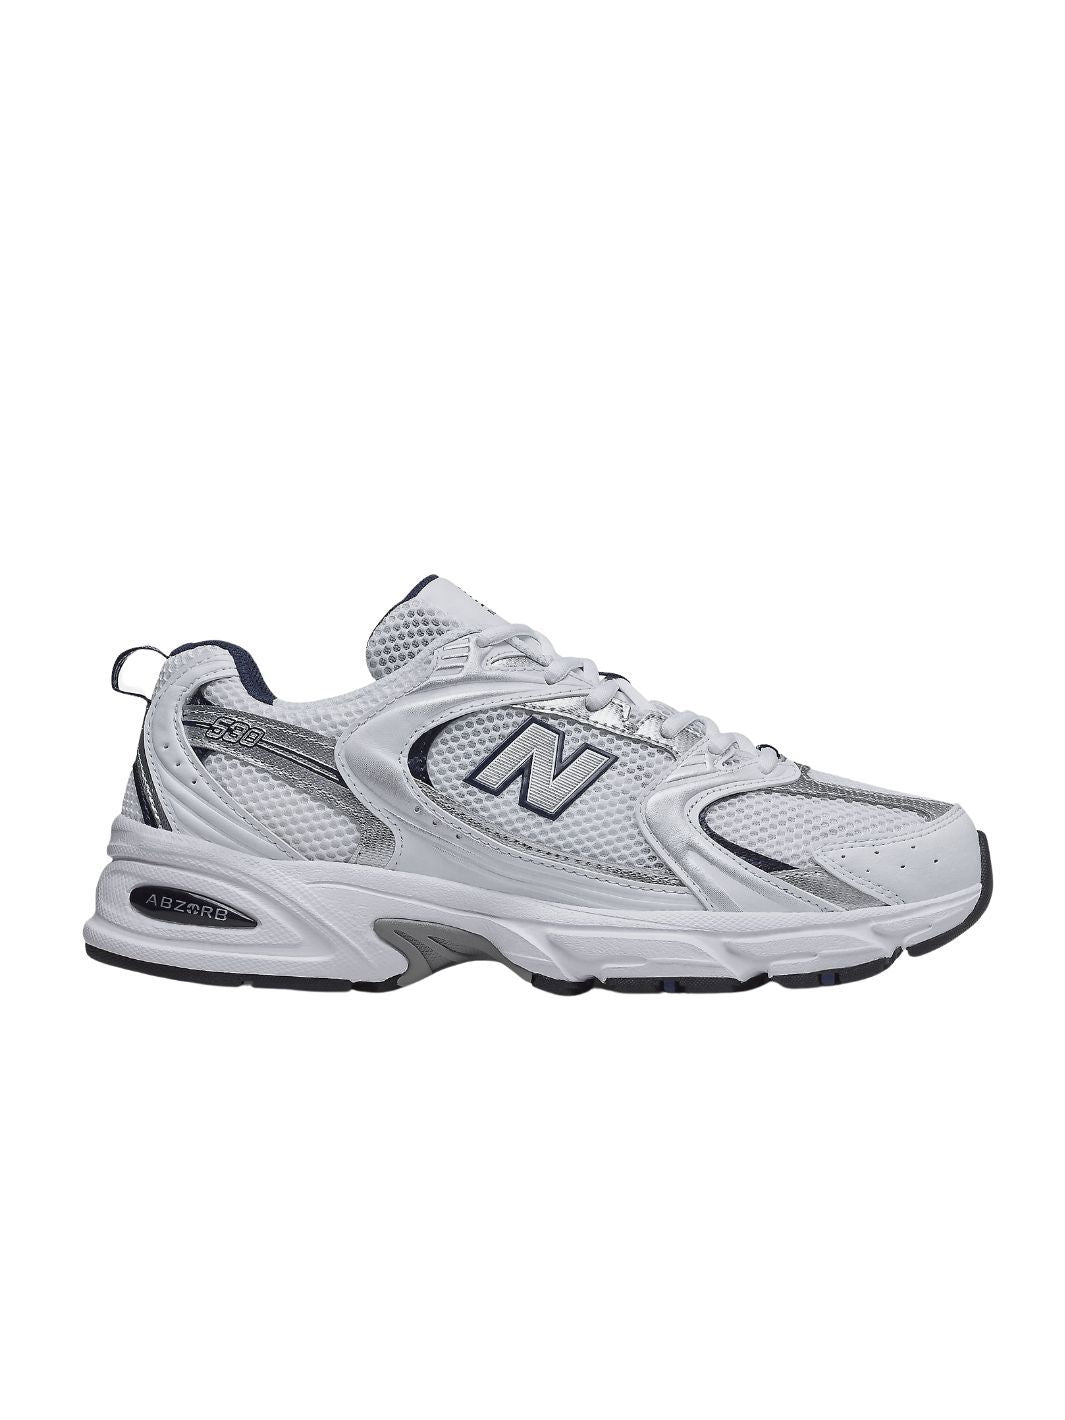 New Balance Shoes Sneakers | MR530SG